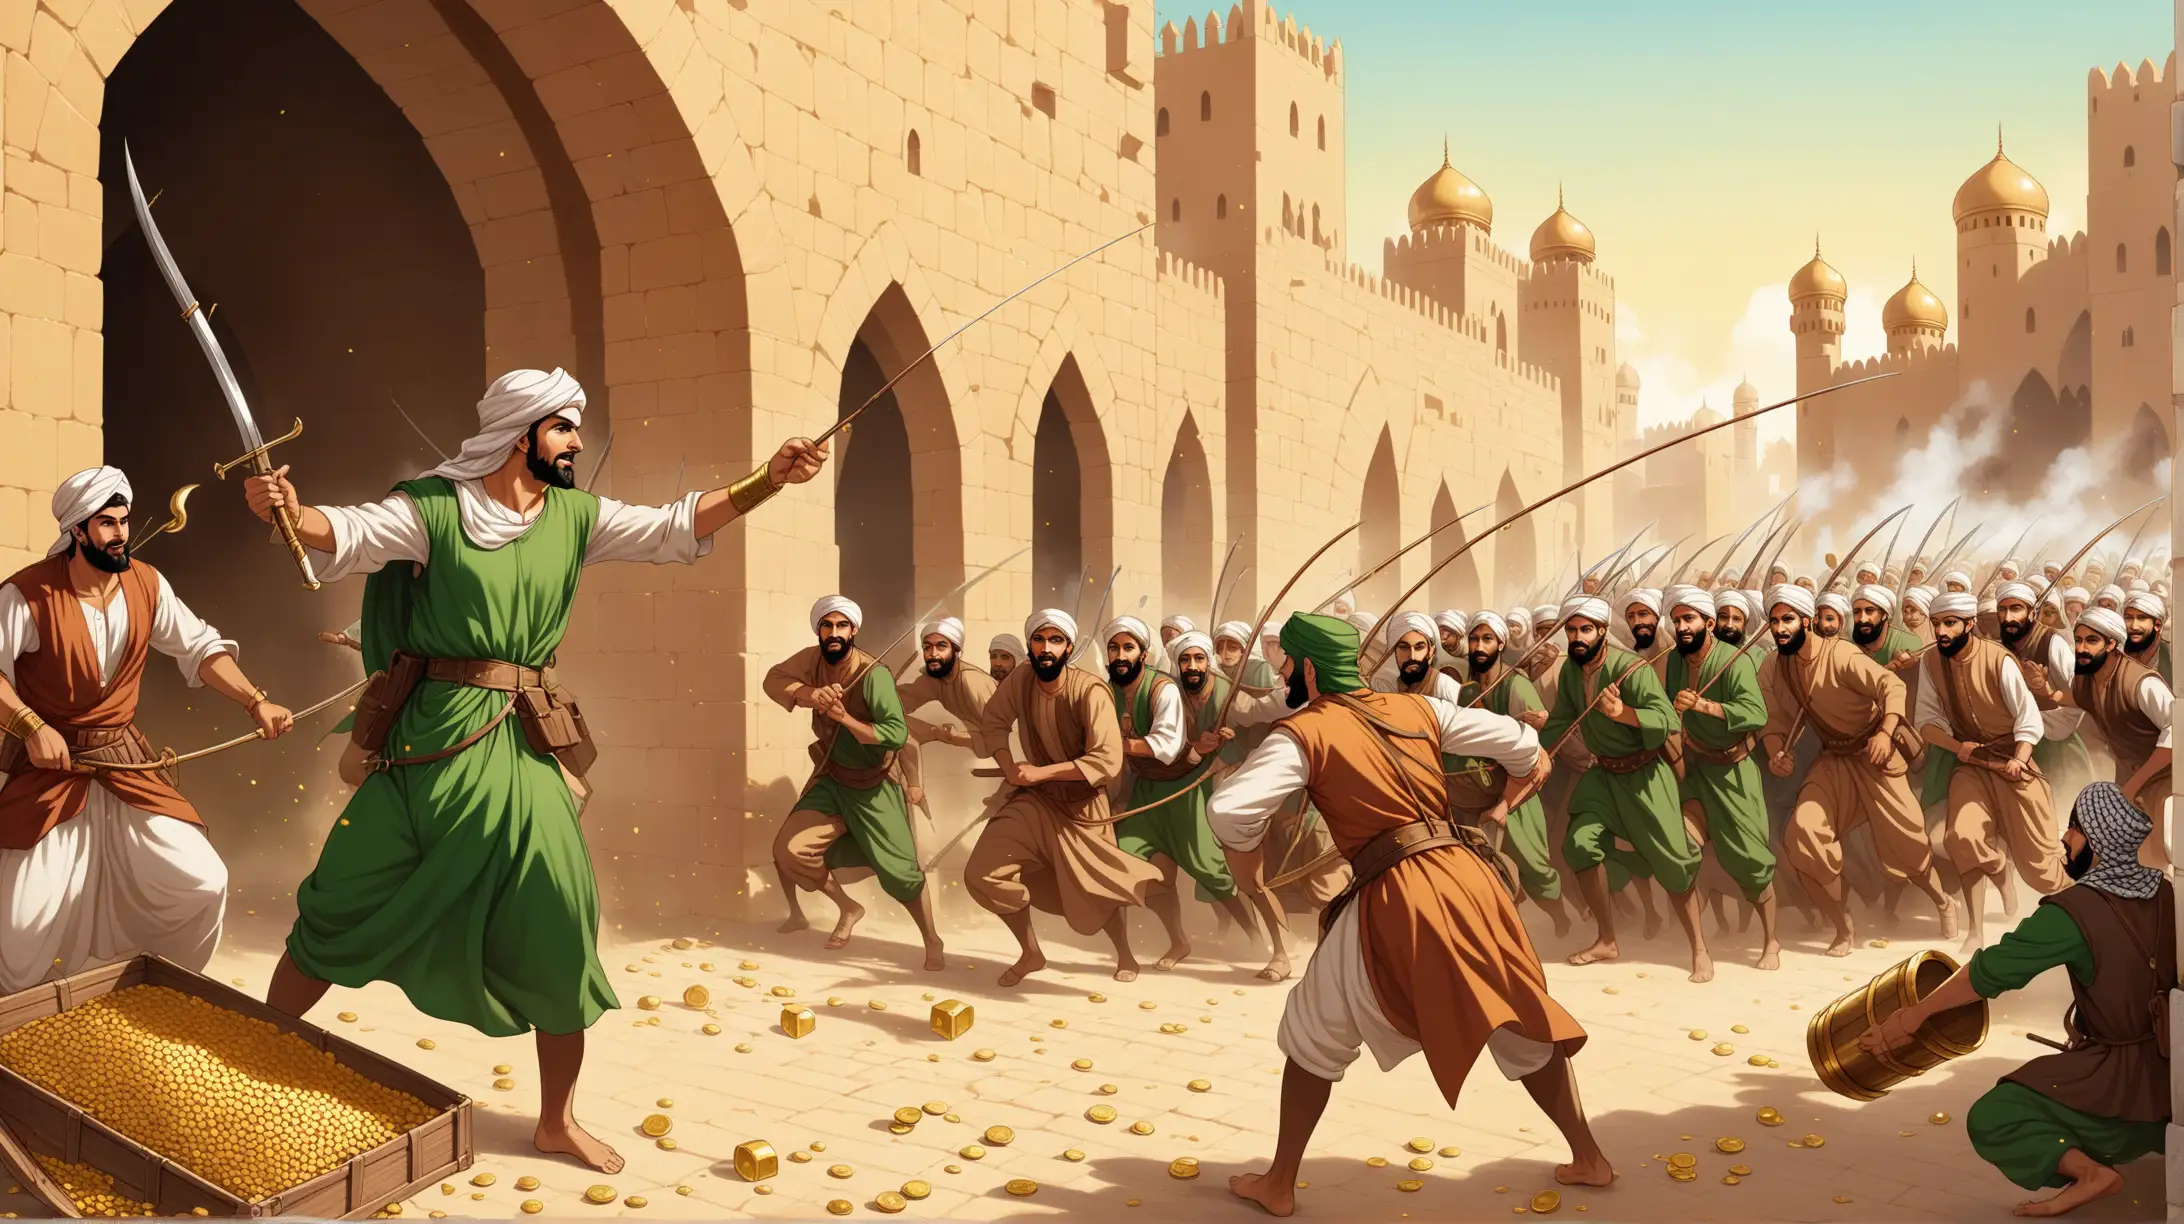 19th century Arabic Muslim Robinhood is attacking a convey and looting treasure